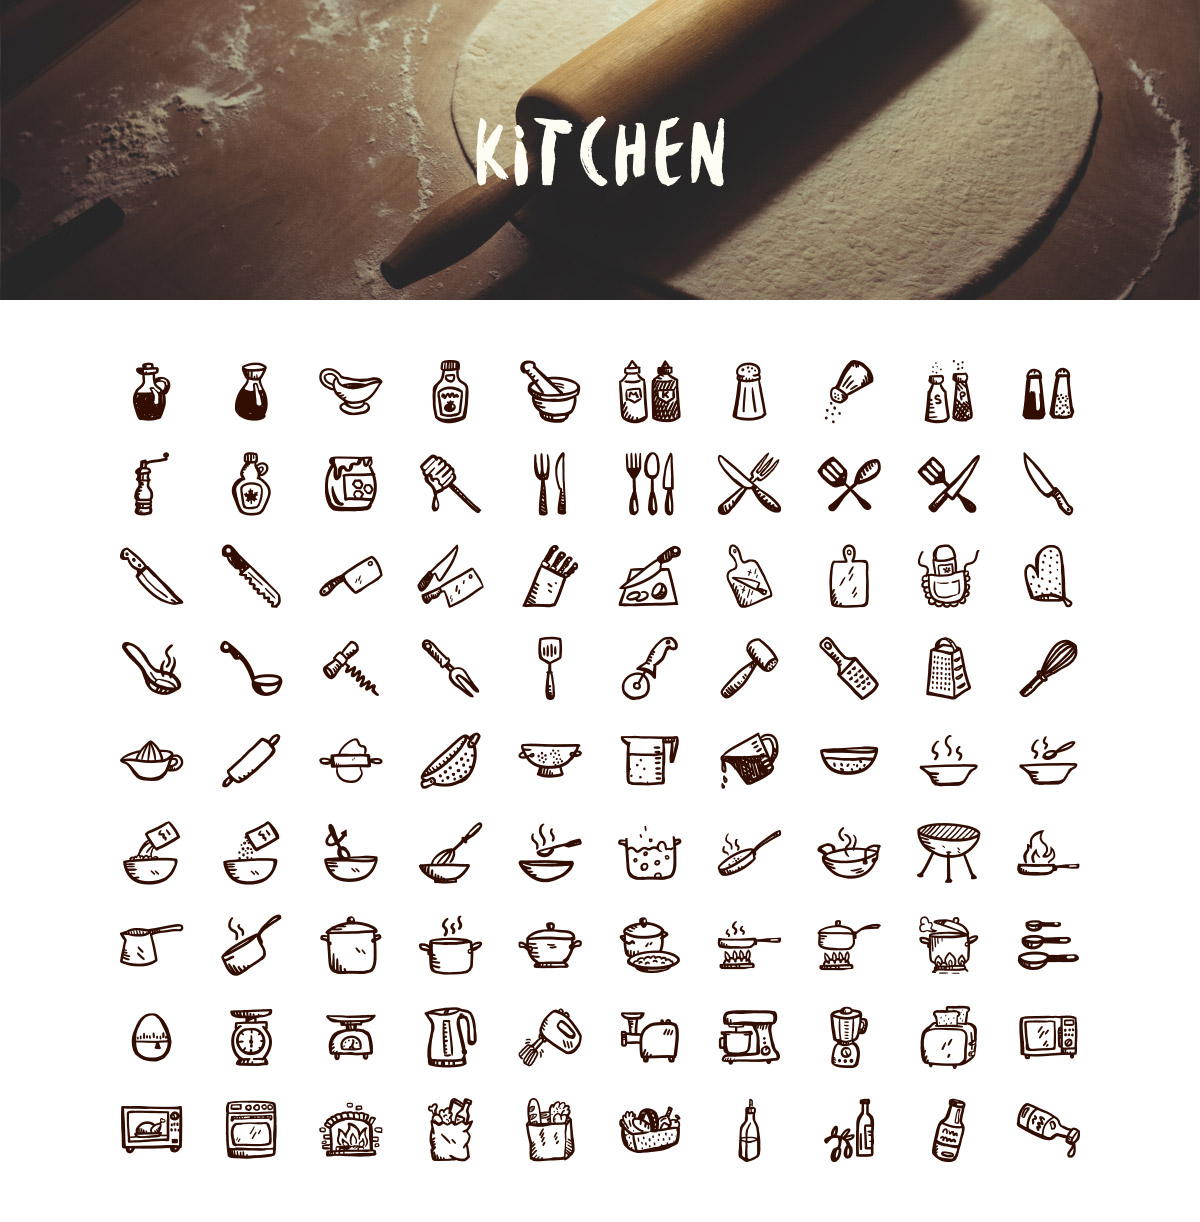 50 Awesome Kitchen, Food and Cooking Icon Sets - Hongkiat